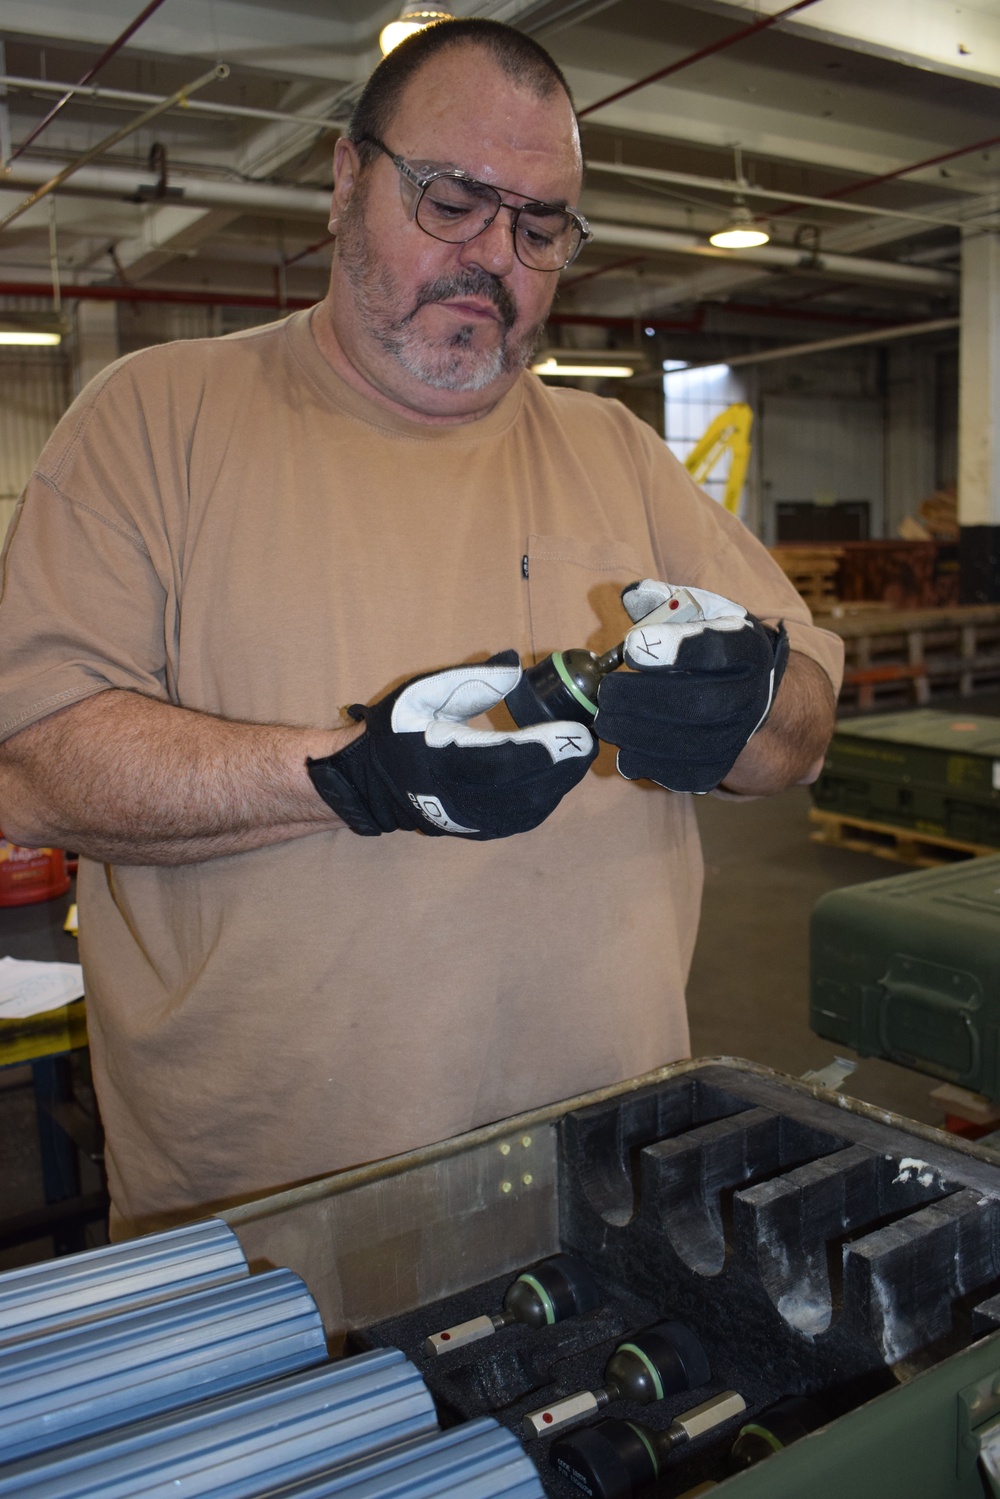 Crane Army Ensures Quality of Munitions Sent to Warfighters